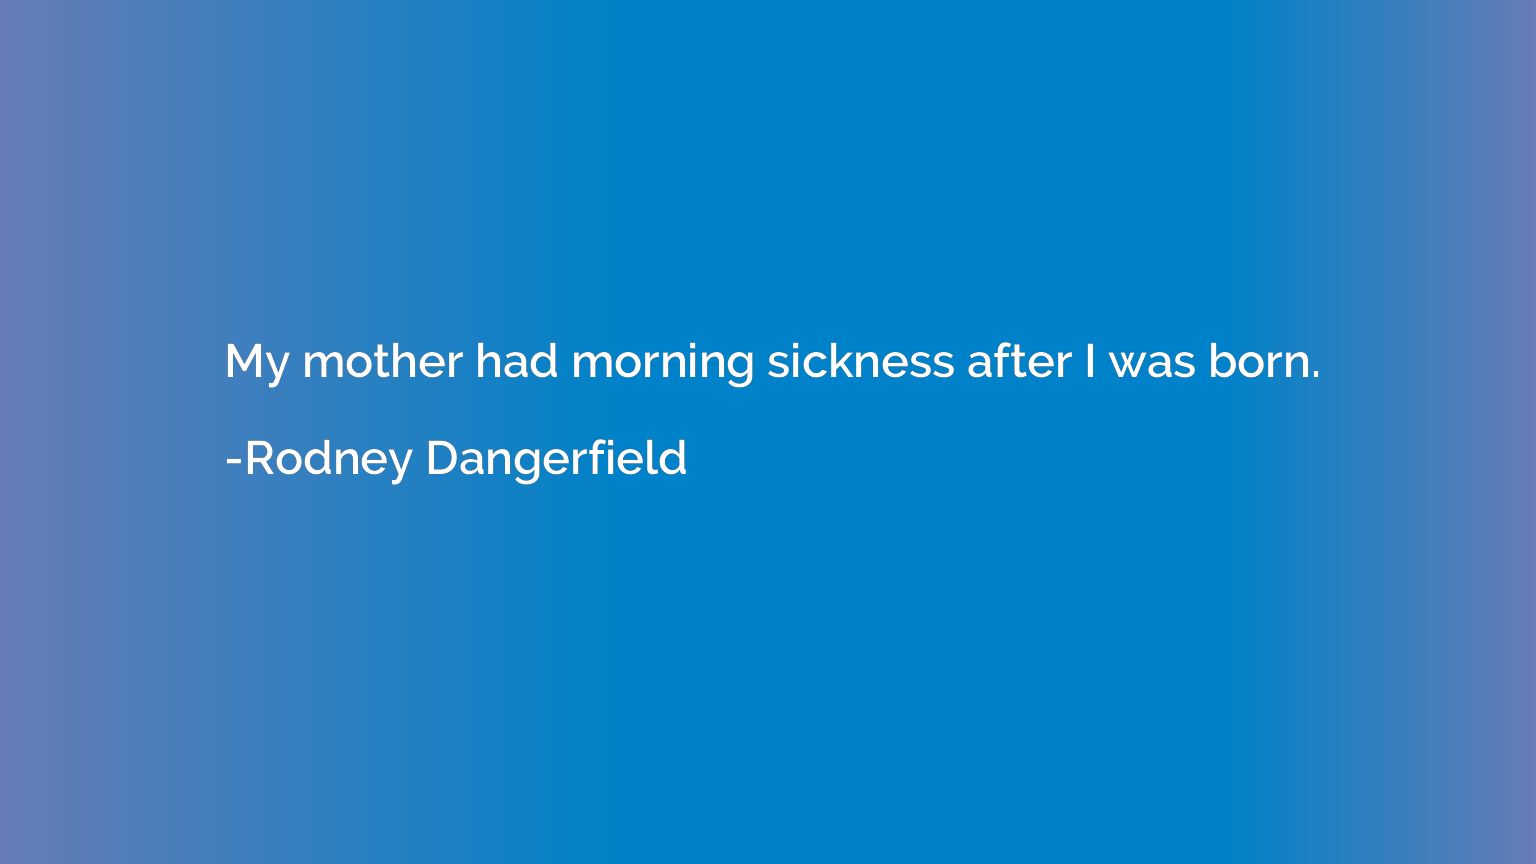 My mother had morning sickness after I was born.